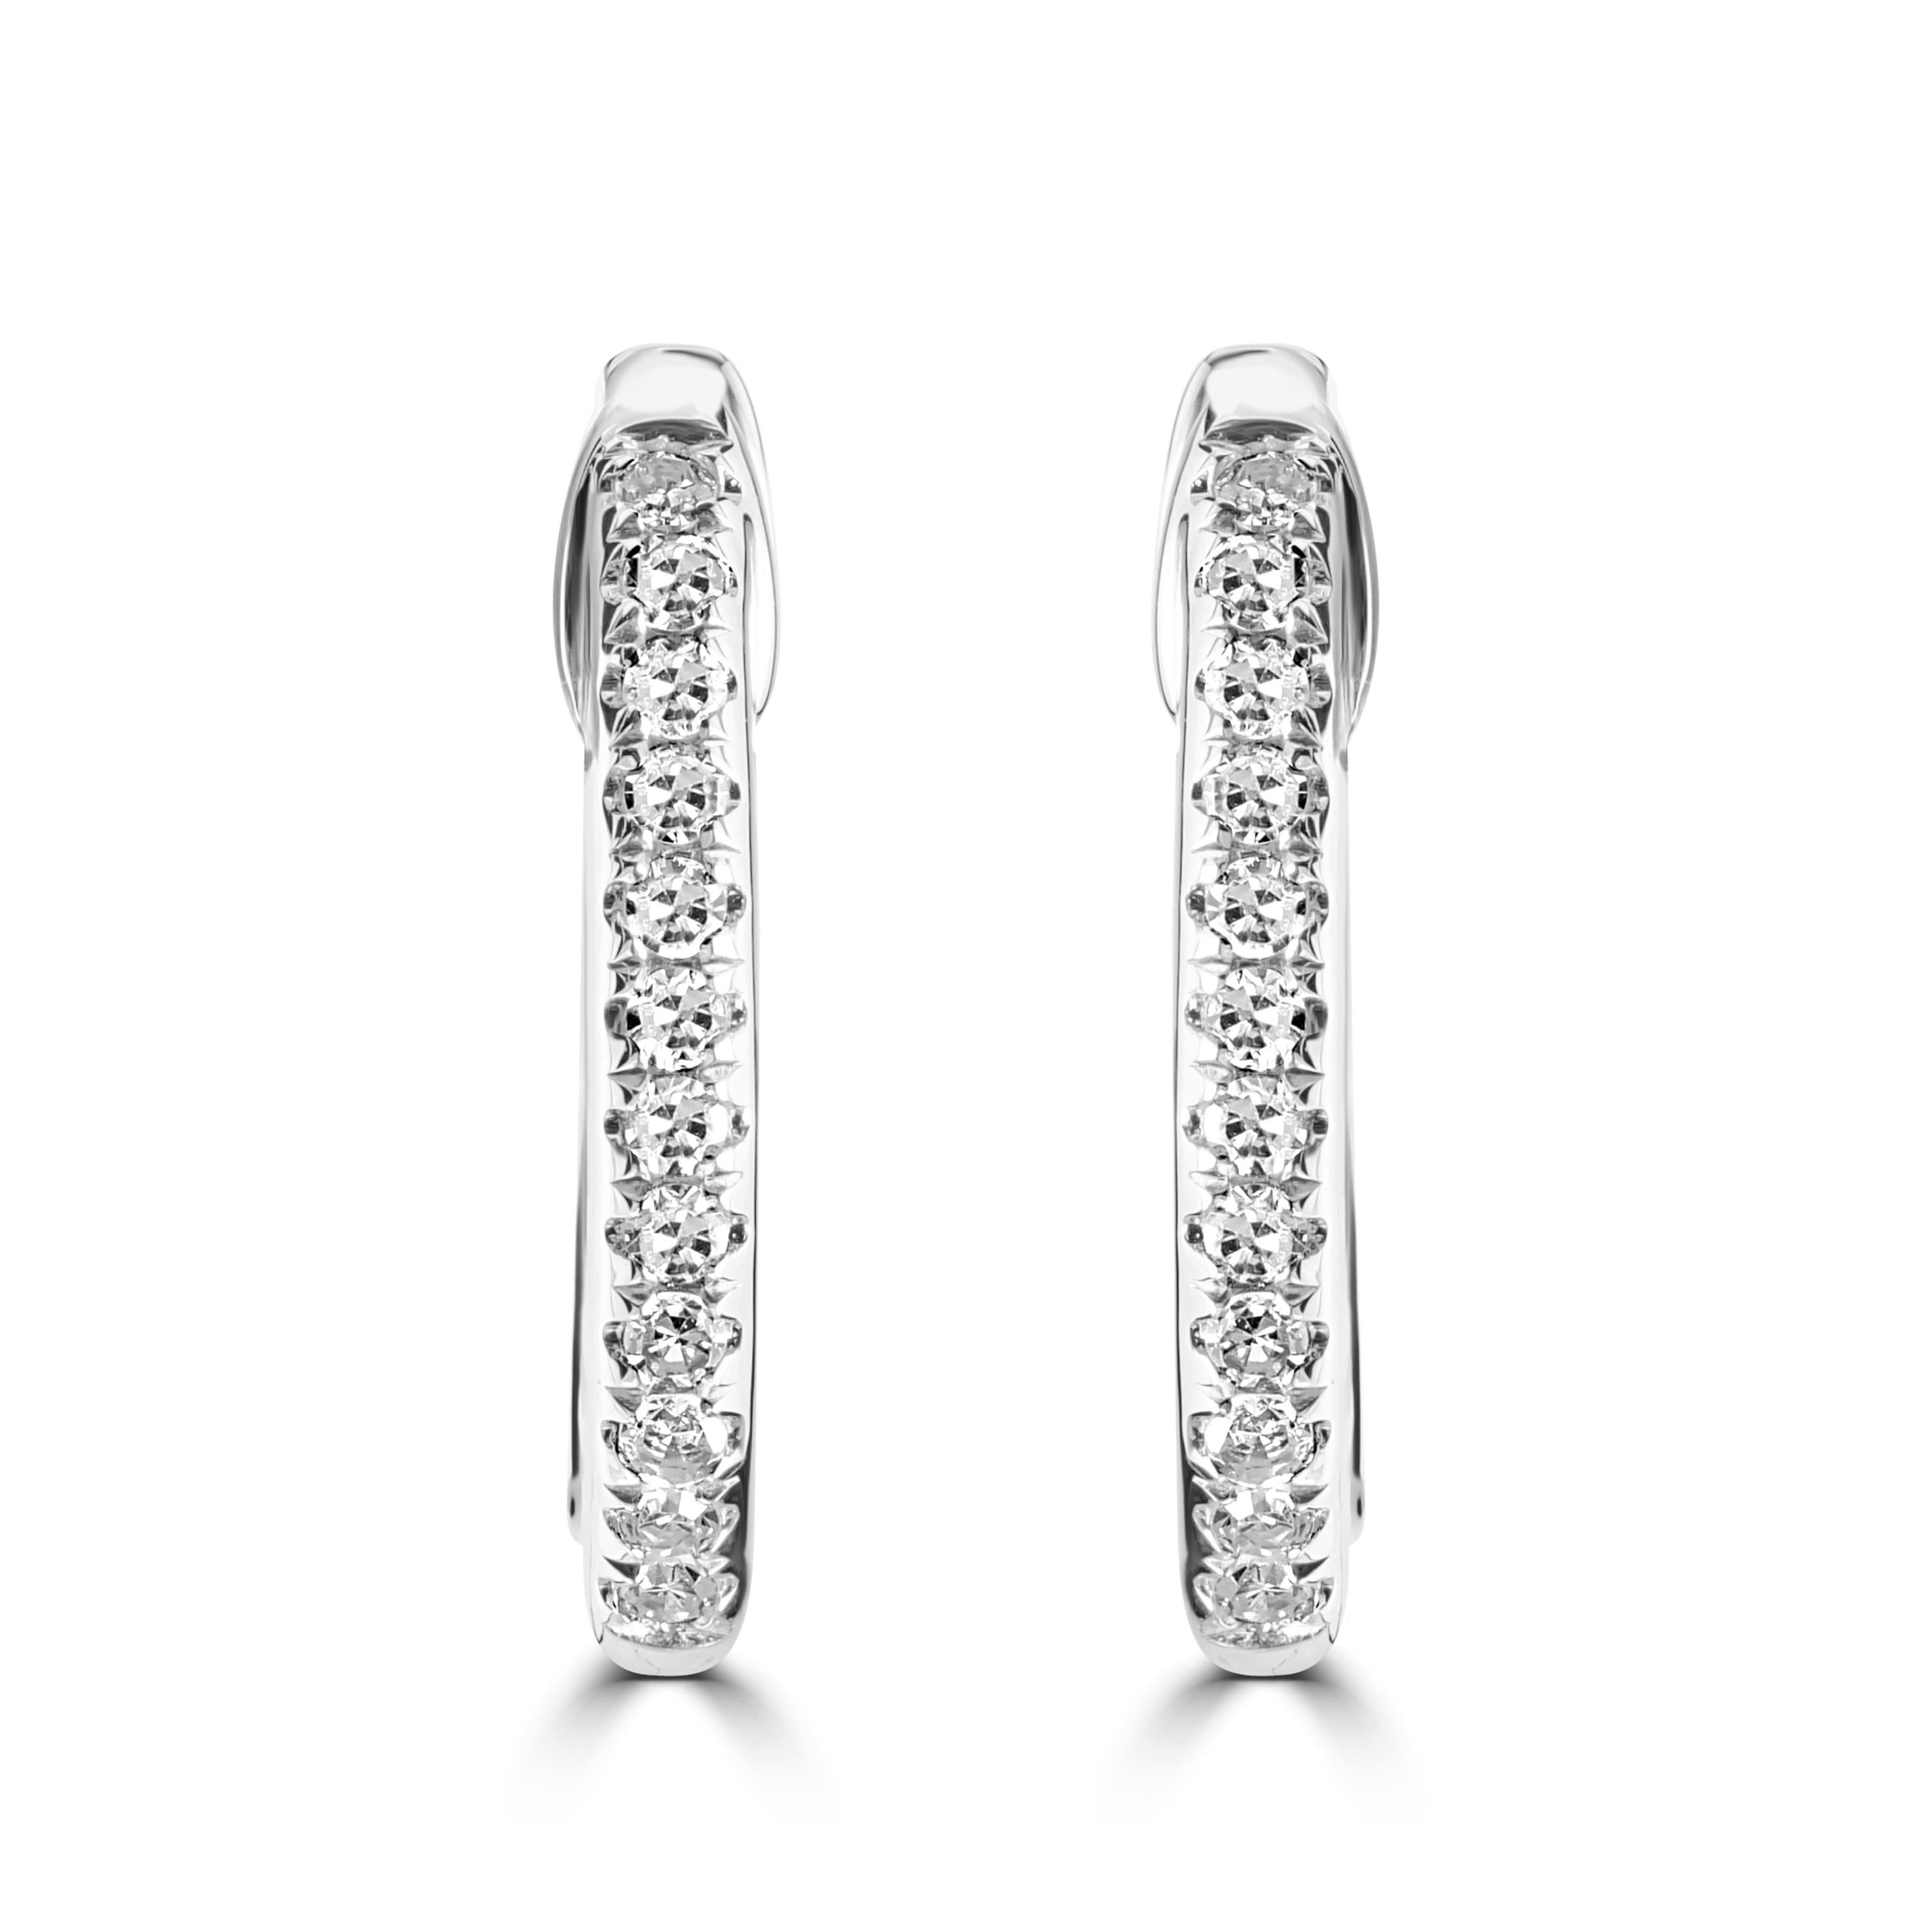 These Luxle adorable hoops glitter with 24 pave round diamonds. Handcrafted in 18K white gold they come with huggie backs. Perfect for daily wear.

Please follow the Luxury Jewels storefront to view the latest collections & exclusive one of a kind